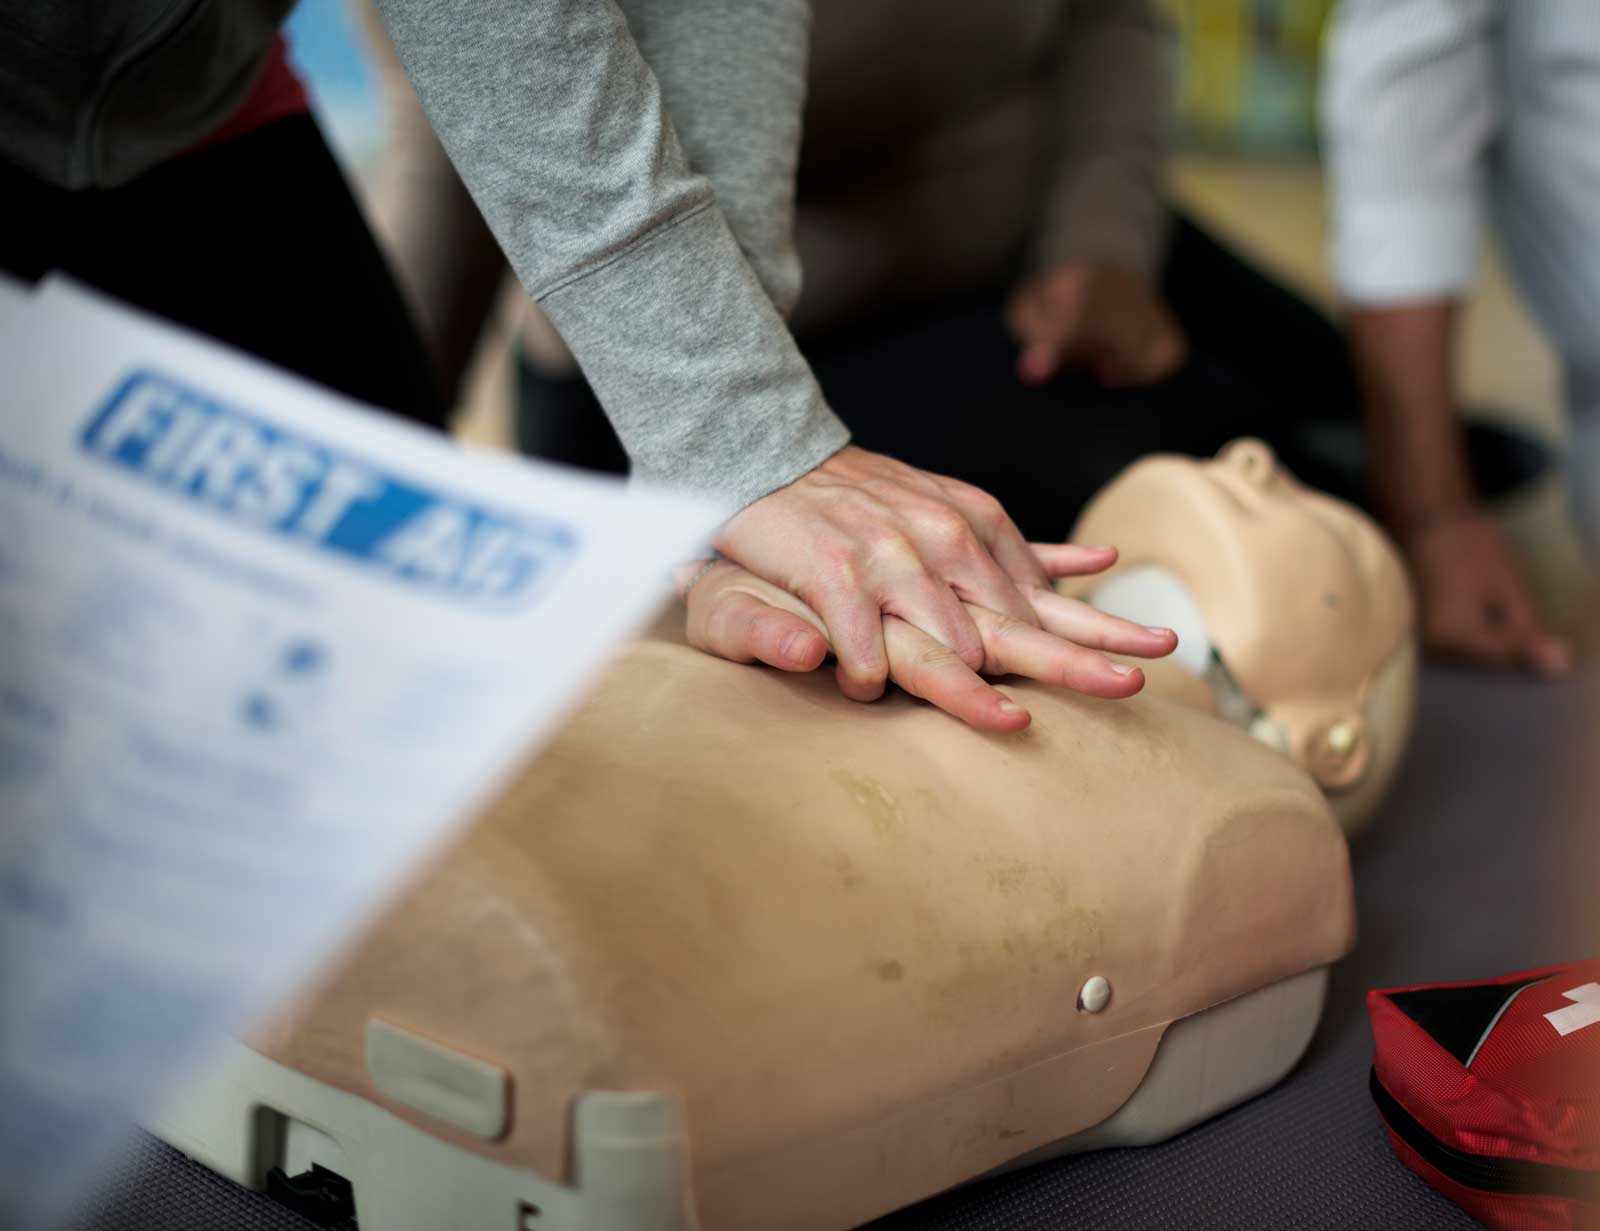 What is CPR (cardiopulmonary resuscitation) and what happens during CPR